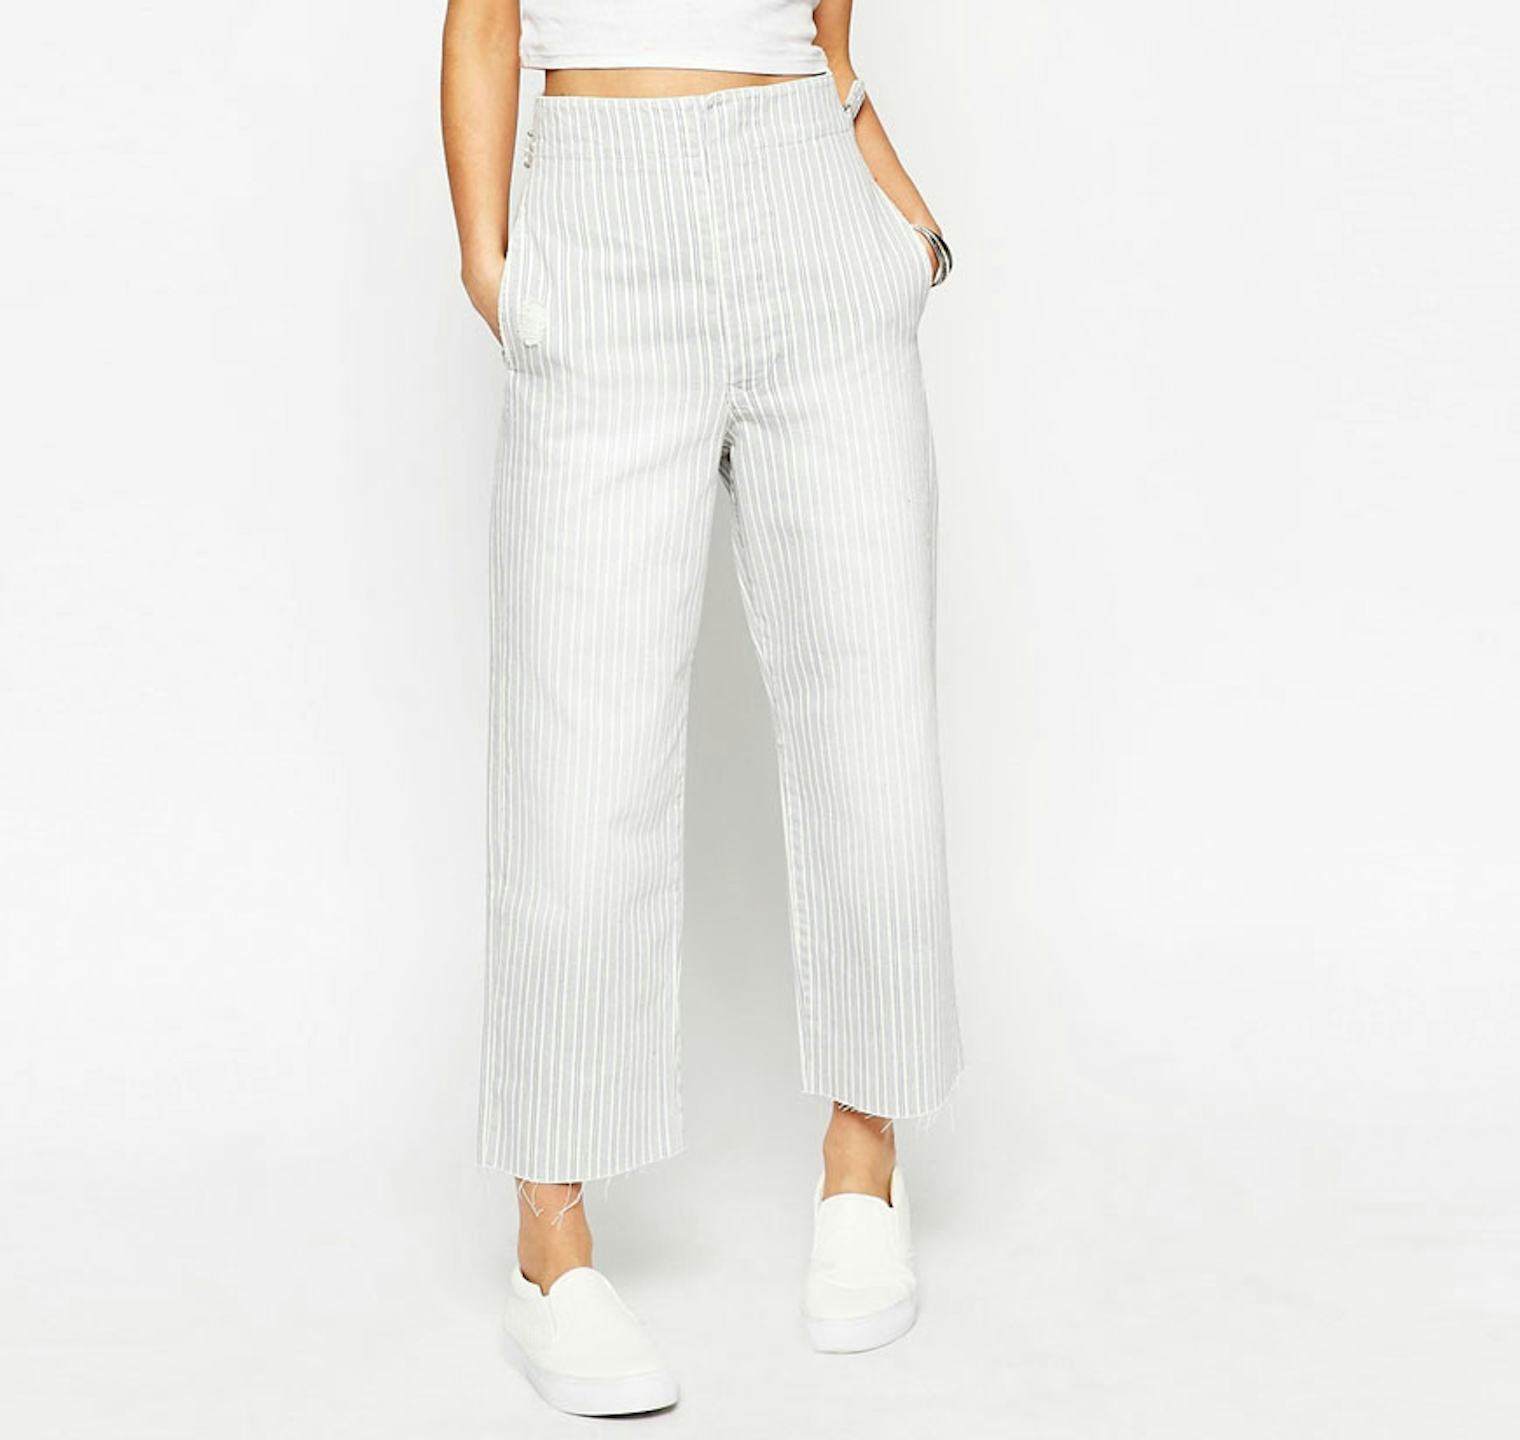 20 Steals At The ASOS Sale Right Now